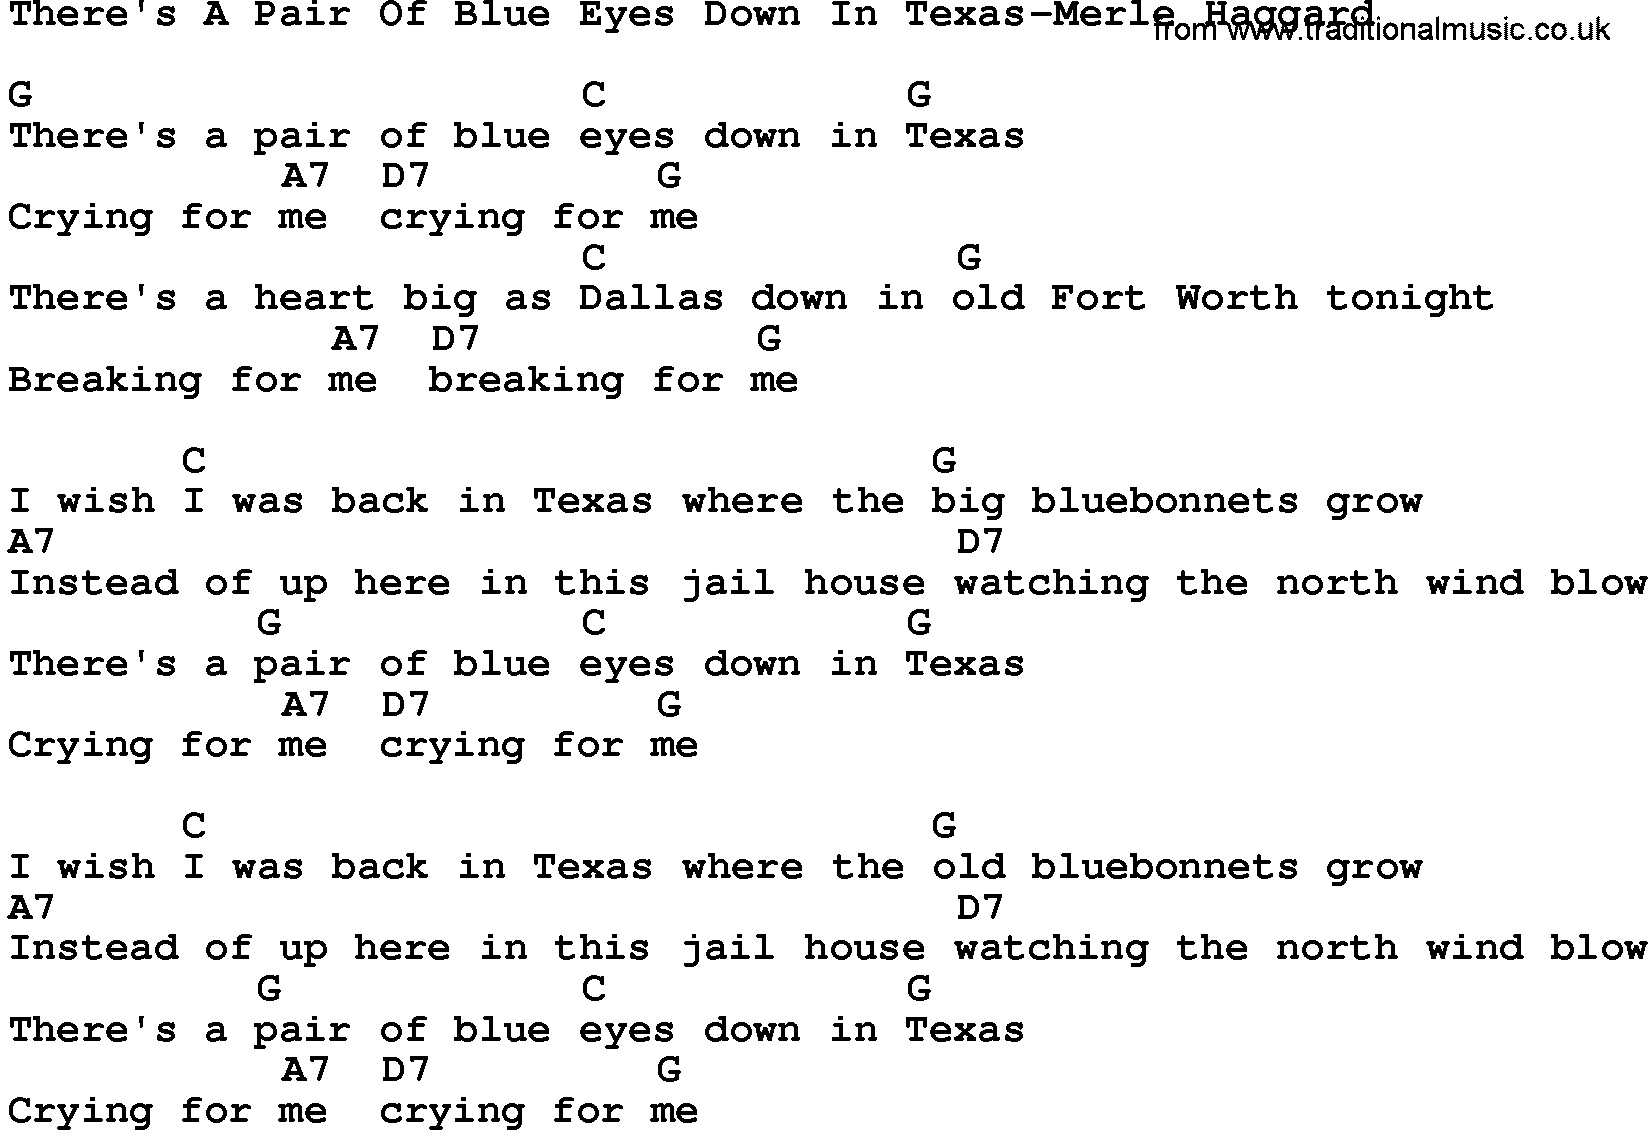 Country music song: There's A Pair Of Blue Eyes Down In Texas-Merle Haggard lyrics and chords